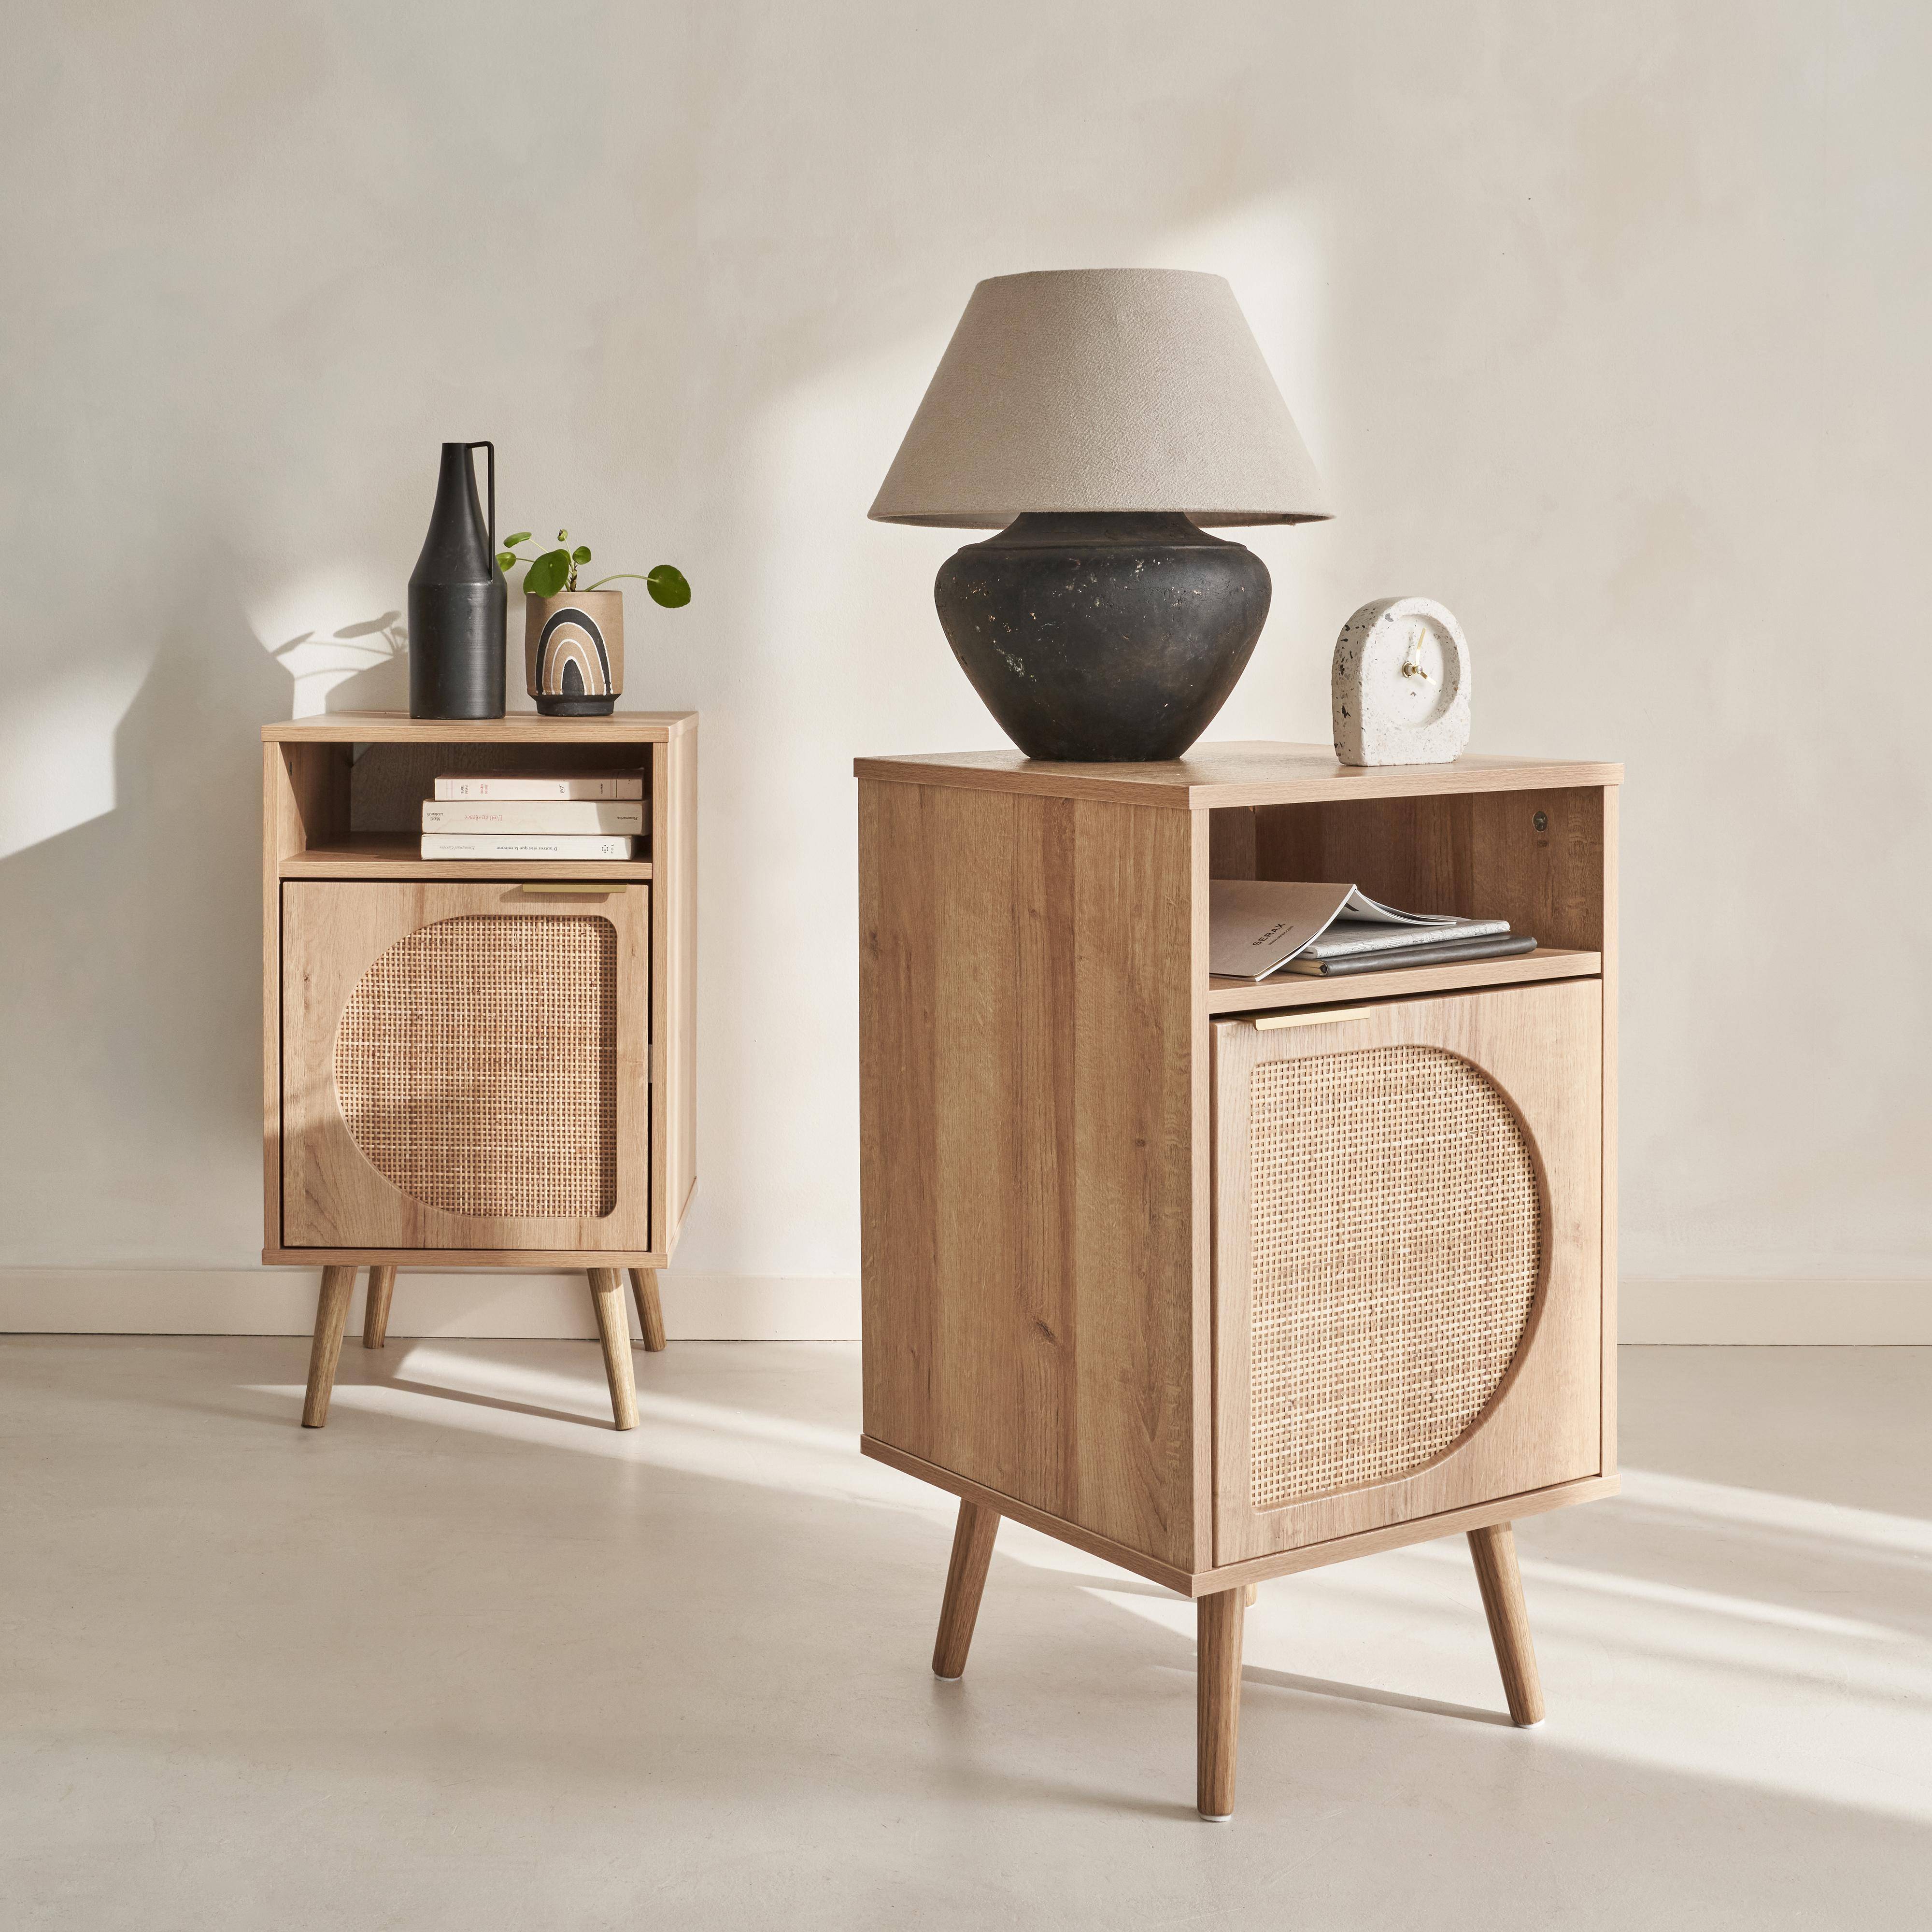 Pair of wood and rounded cane rattan bedside tables, 40x39x65.8cm, Eva, 1 cupboard, 1 storage space each Photo1